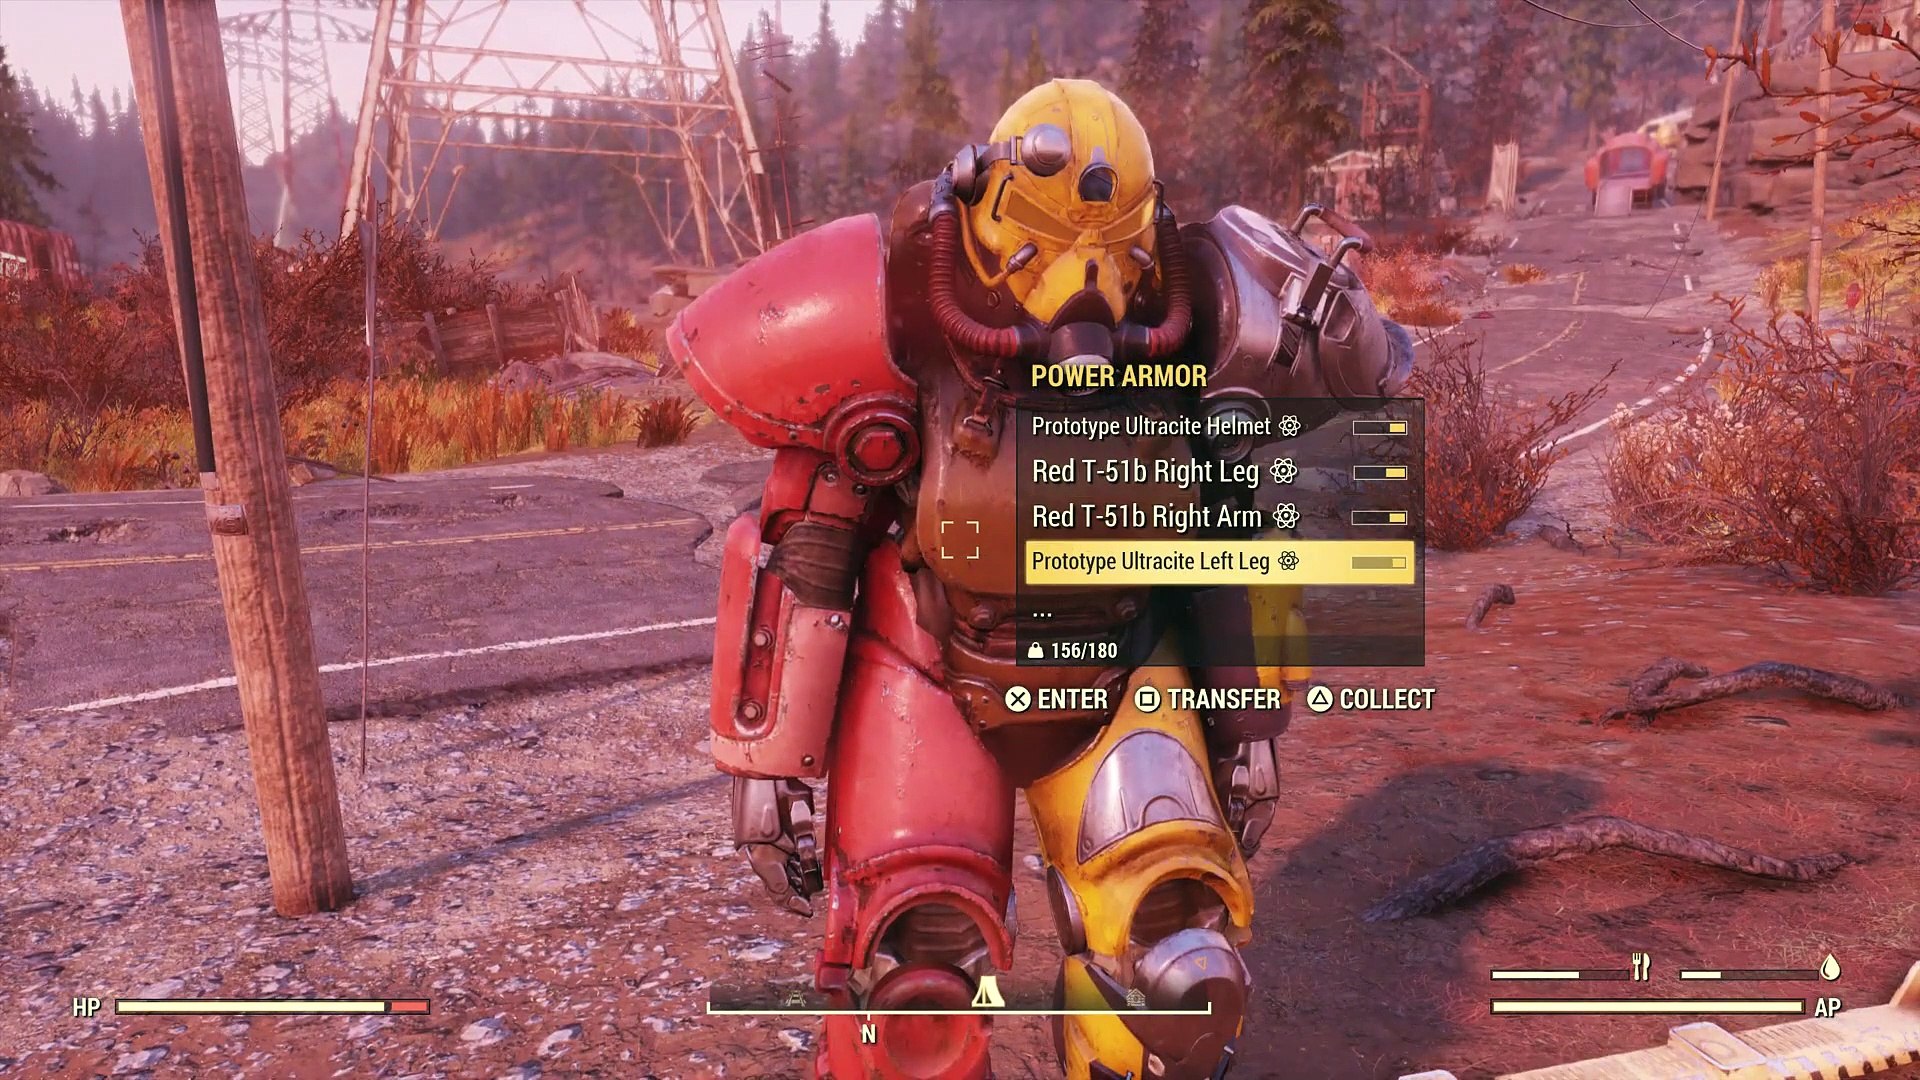 Fallout 76 Power Armor Paint Sharing Glitch! Give Atomic Shop Paint To  Anyone! (Fallout 76 Glitches) - Dailymotion Video